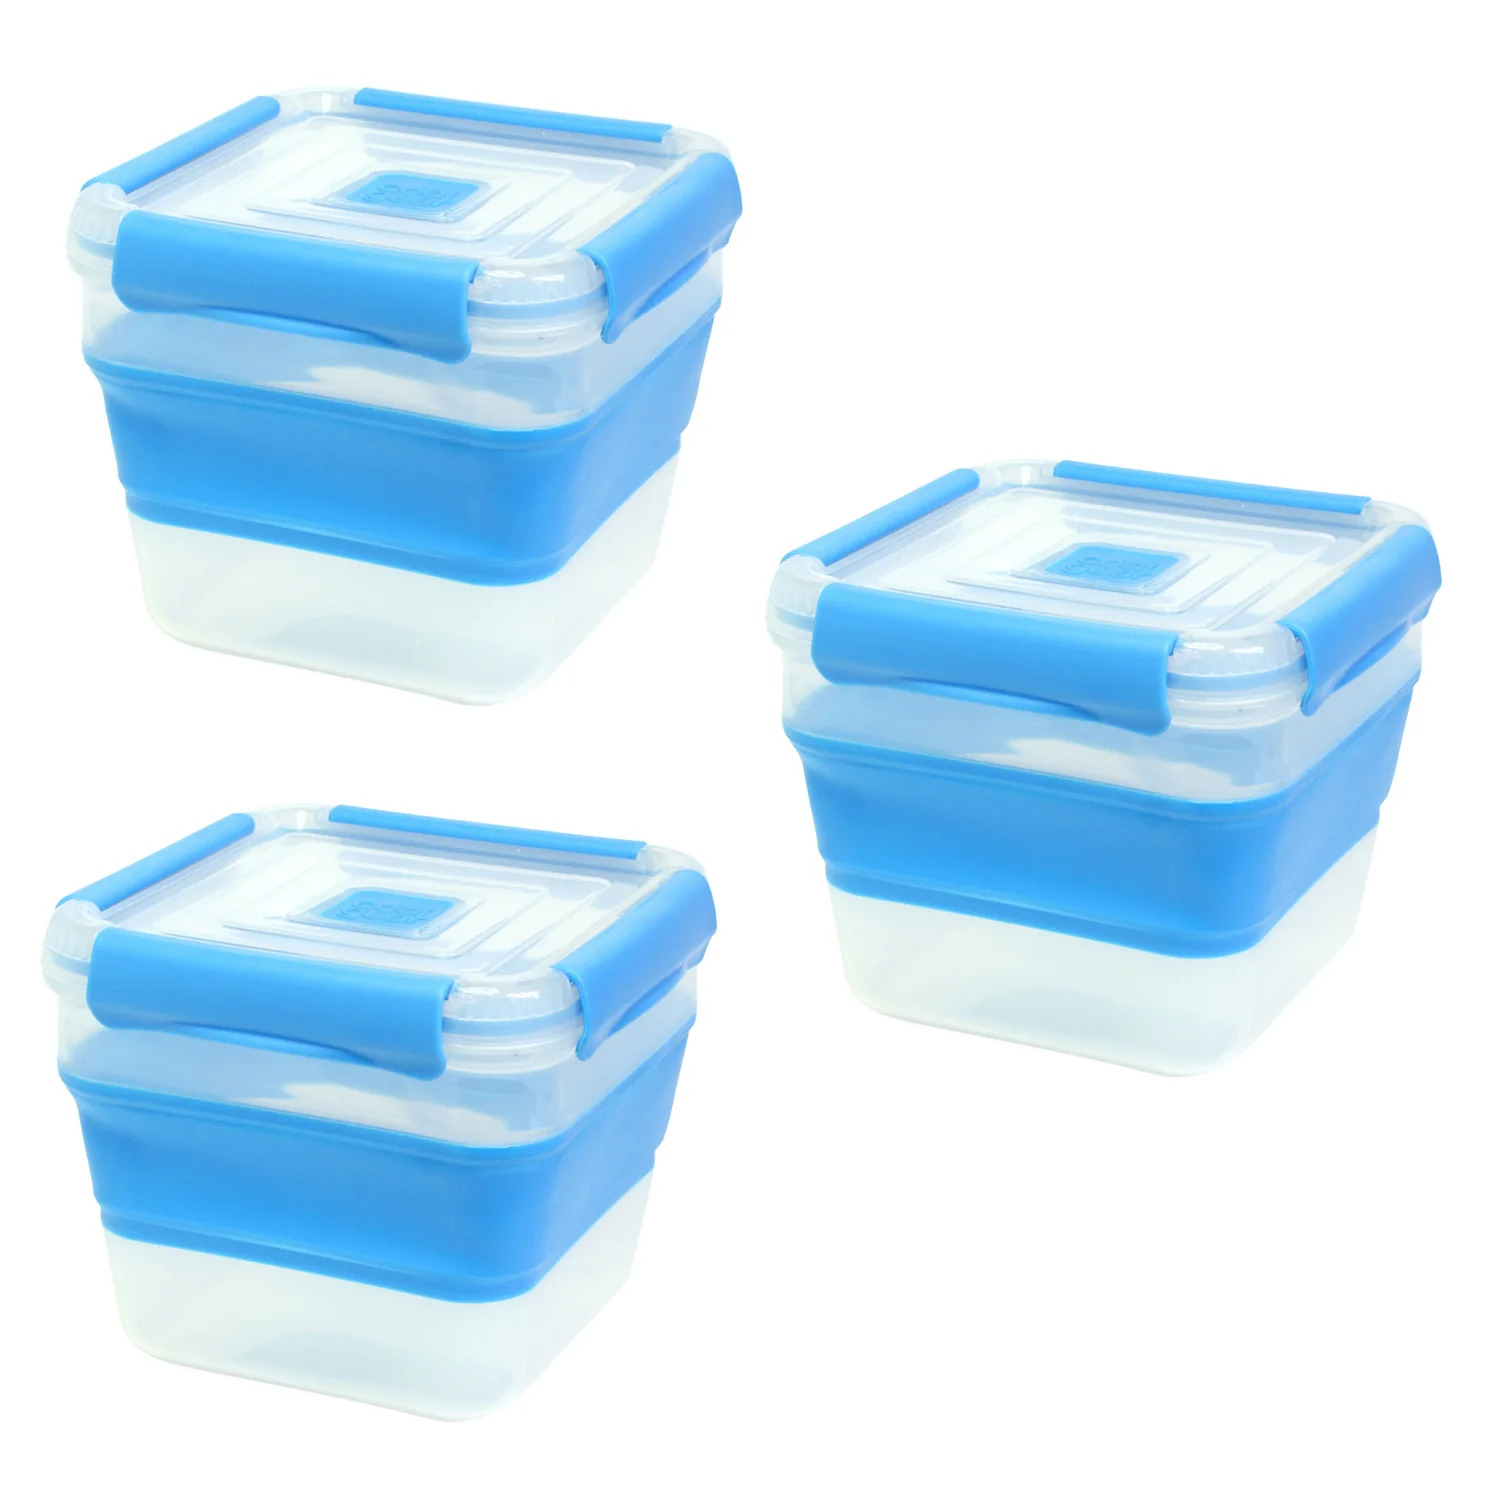 COOL GEAR 3-Pack Collapsible 7.5 Cup Square Food Container | Dishwasher and Microwave Safe | Perfect for On The Go Lunches and Leftovers | Expands to Hold 2x More | Air Tight Snaps Keeps Food Fresh - image 1 of 5